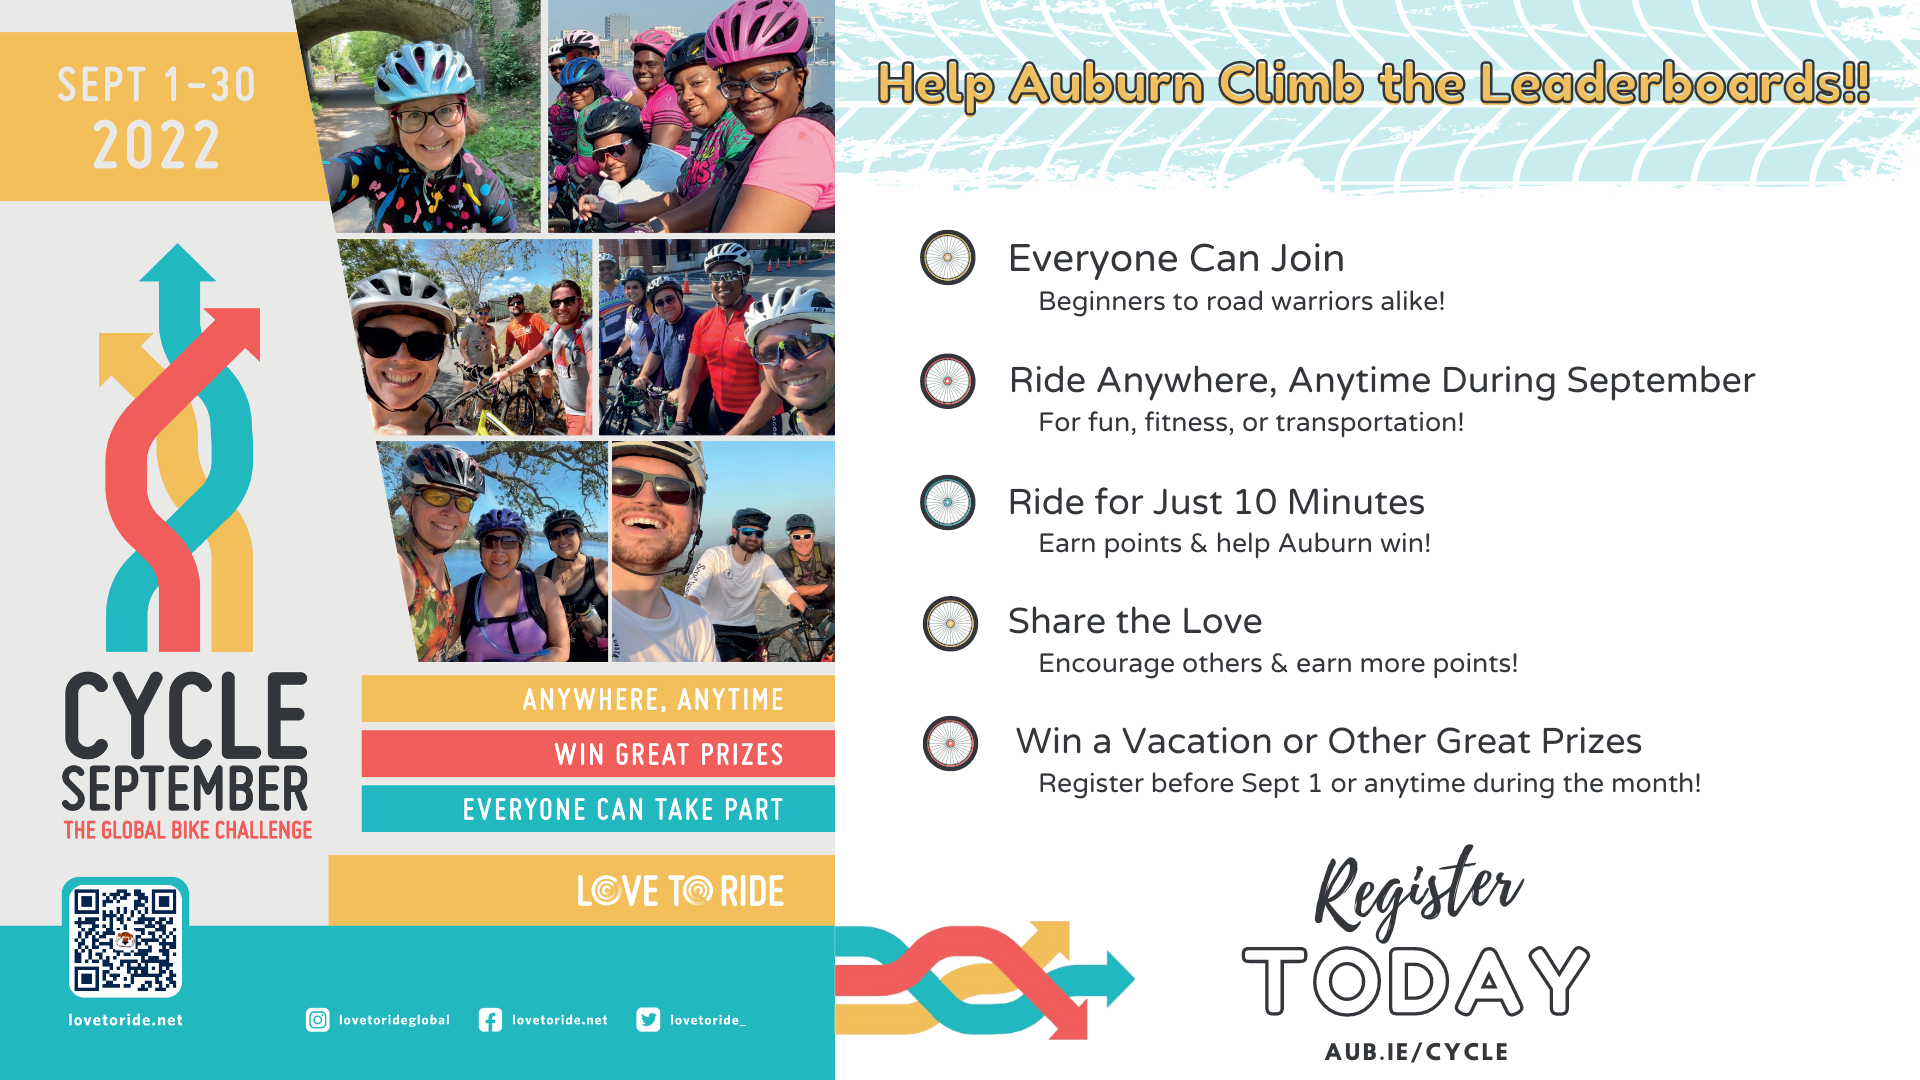 Graphic promoting Cycle September: "Help Auburn Climb the Leaderboards" Everyone Can Join - Beginners to Road Warriors Alike! Ride Anywhere, anytime during September for fun, fitness, or transportation! Ride for just 10 minutes earn points & help Auburn win! Share the love encourage others & earn more points! Win a vacation or other great prizes register before September 1 or anytime during the month! Register today at aub.ie/cycle.